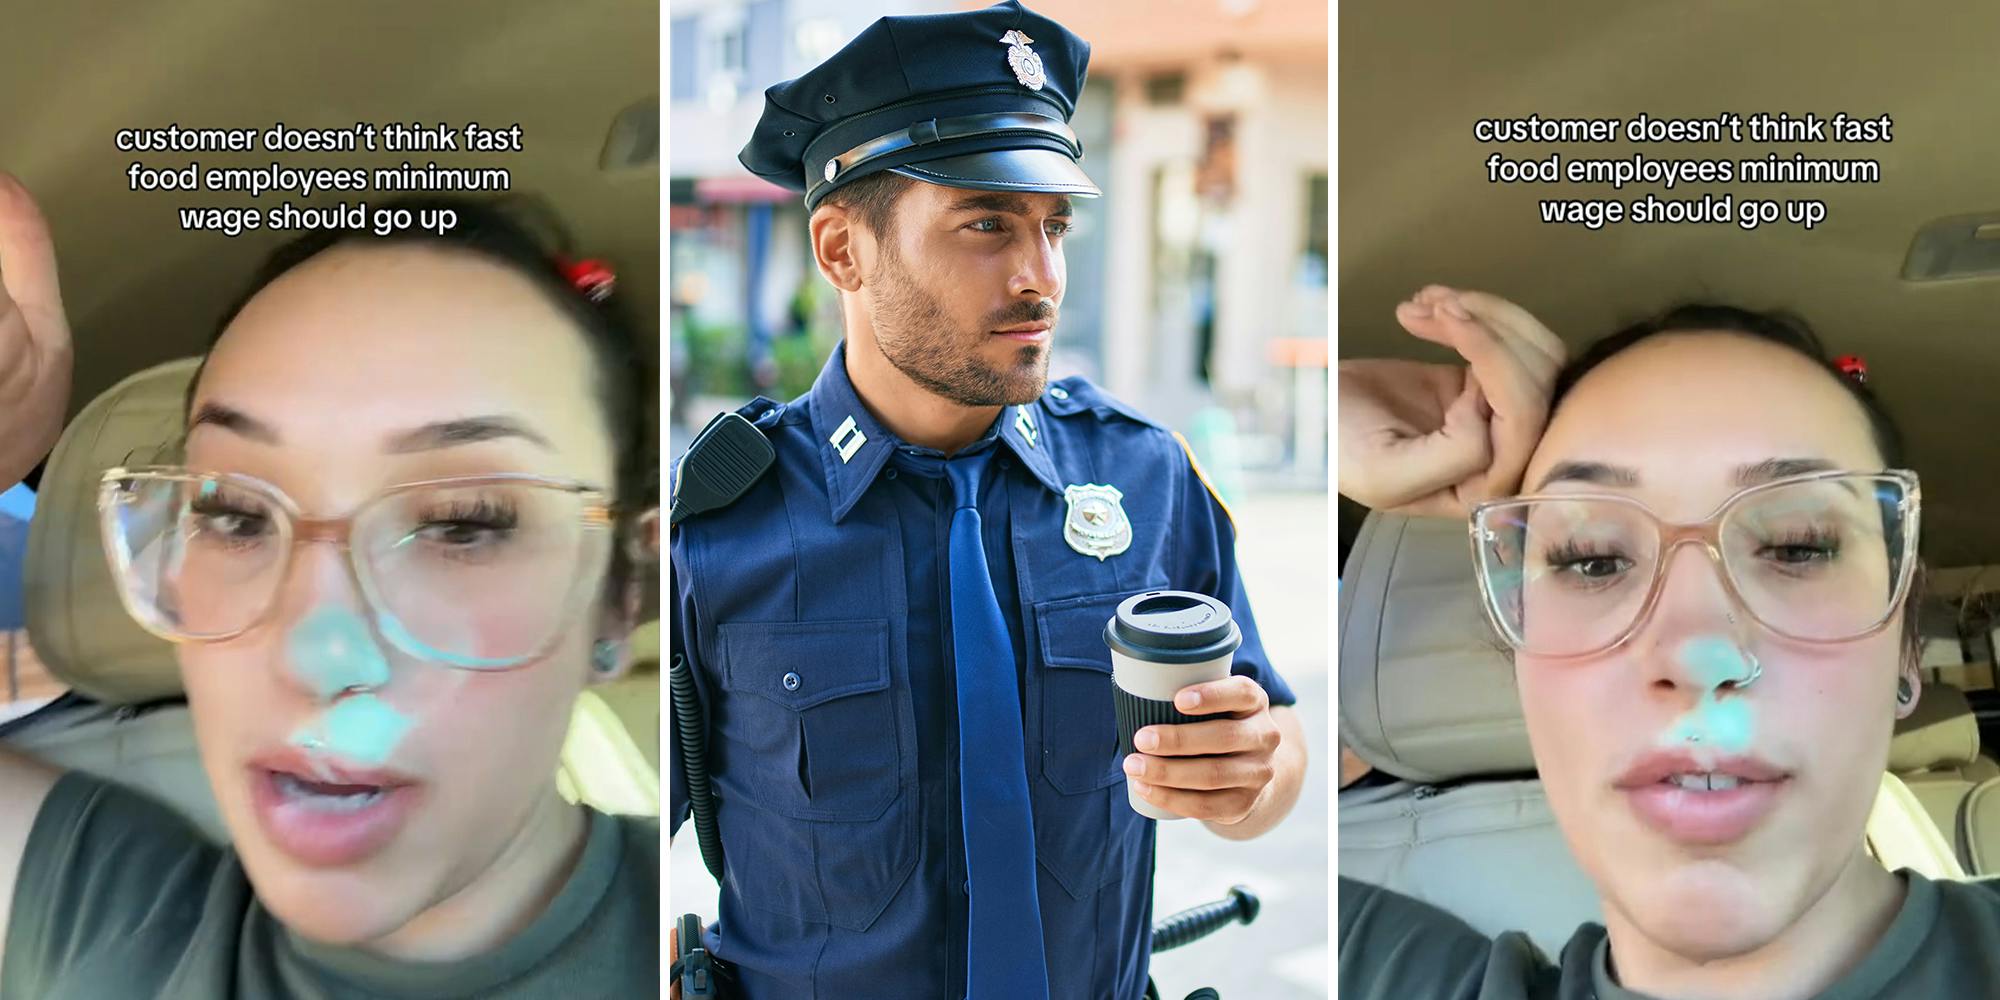 Barista comps a police officer’s drink. Then he says her minimum wage shouldn’t go up